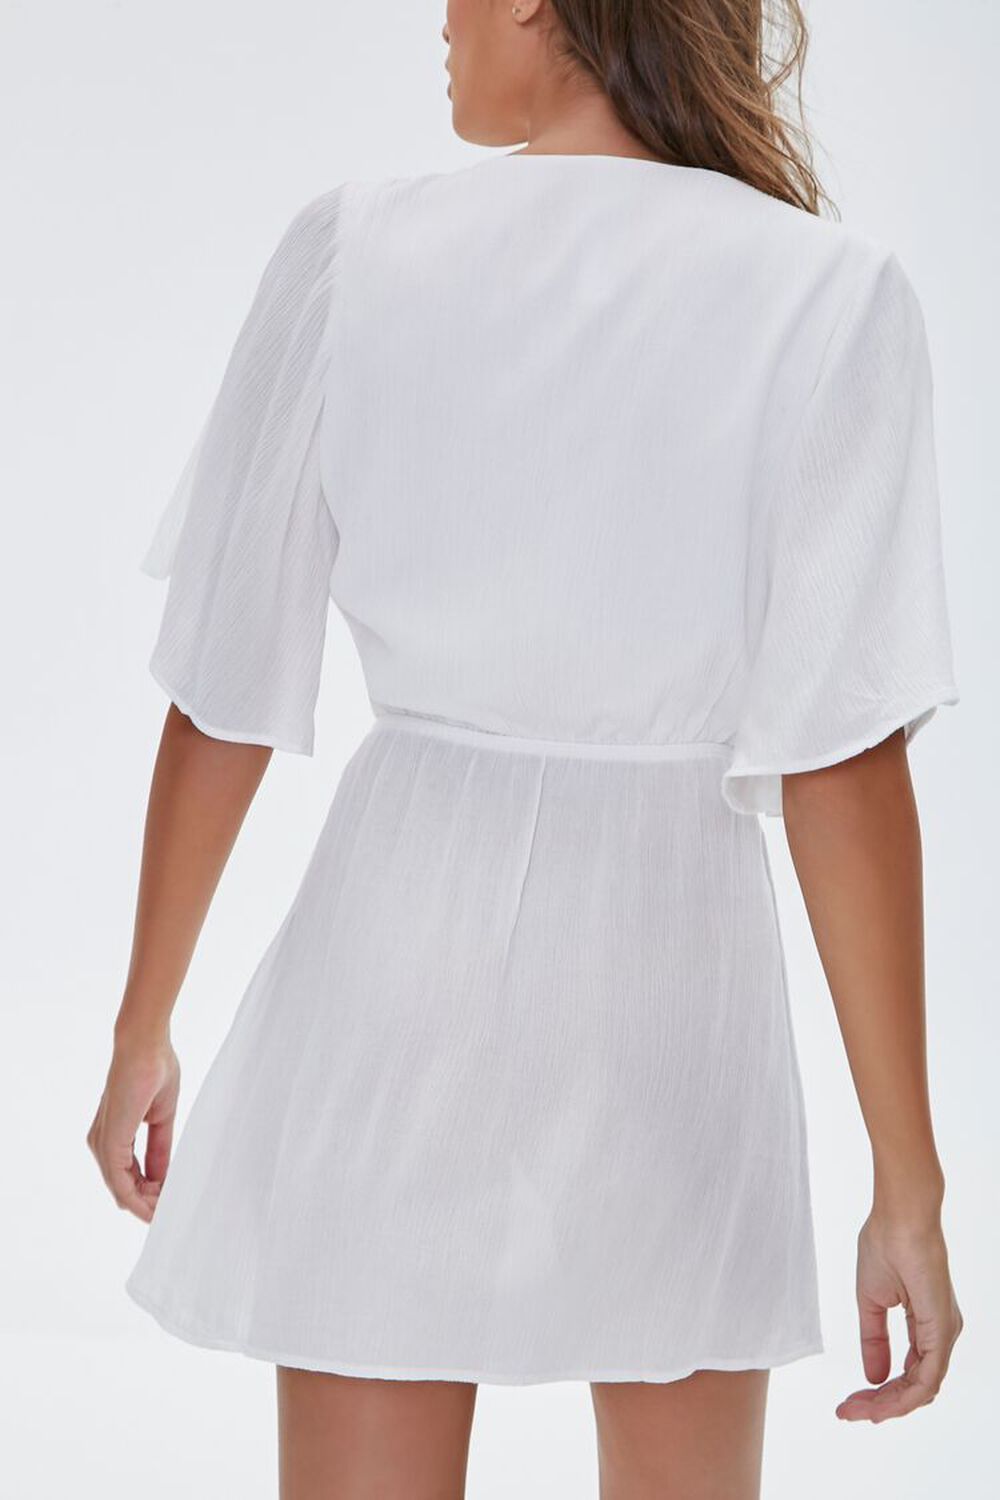 WHITE Tie-Front Swim Cover-Up Dress, image 3